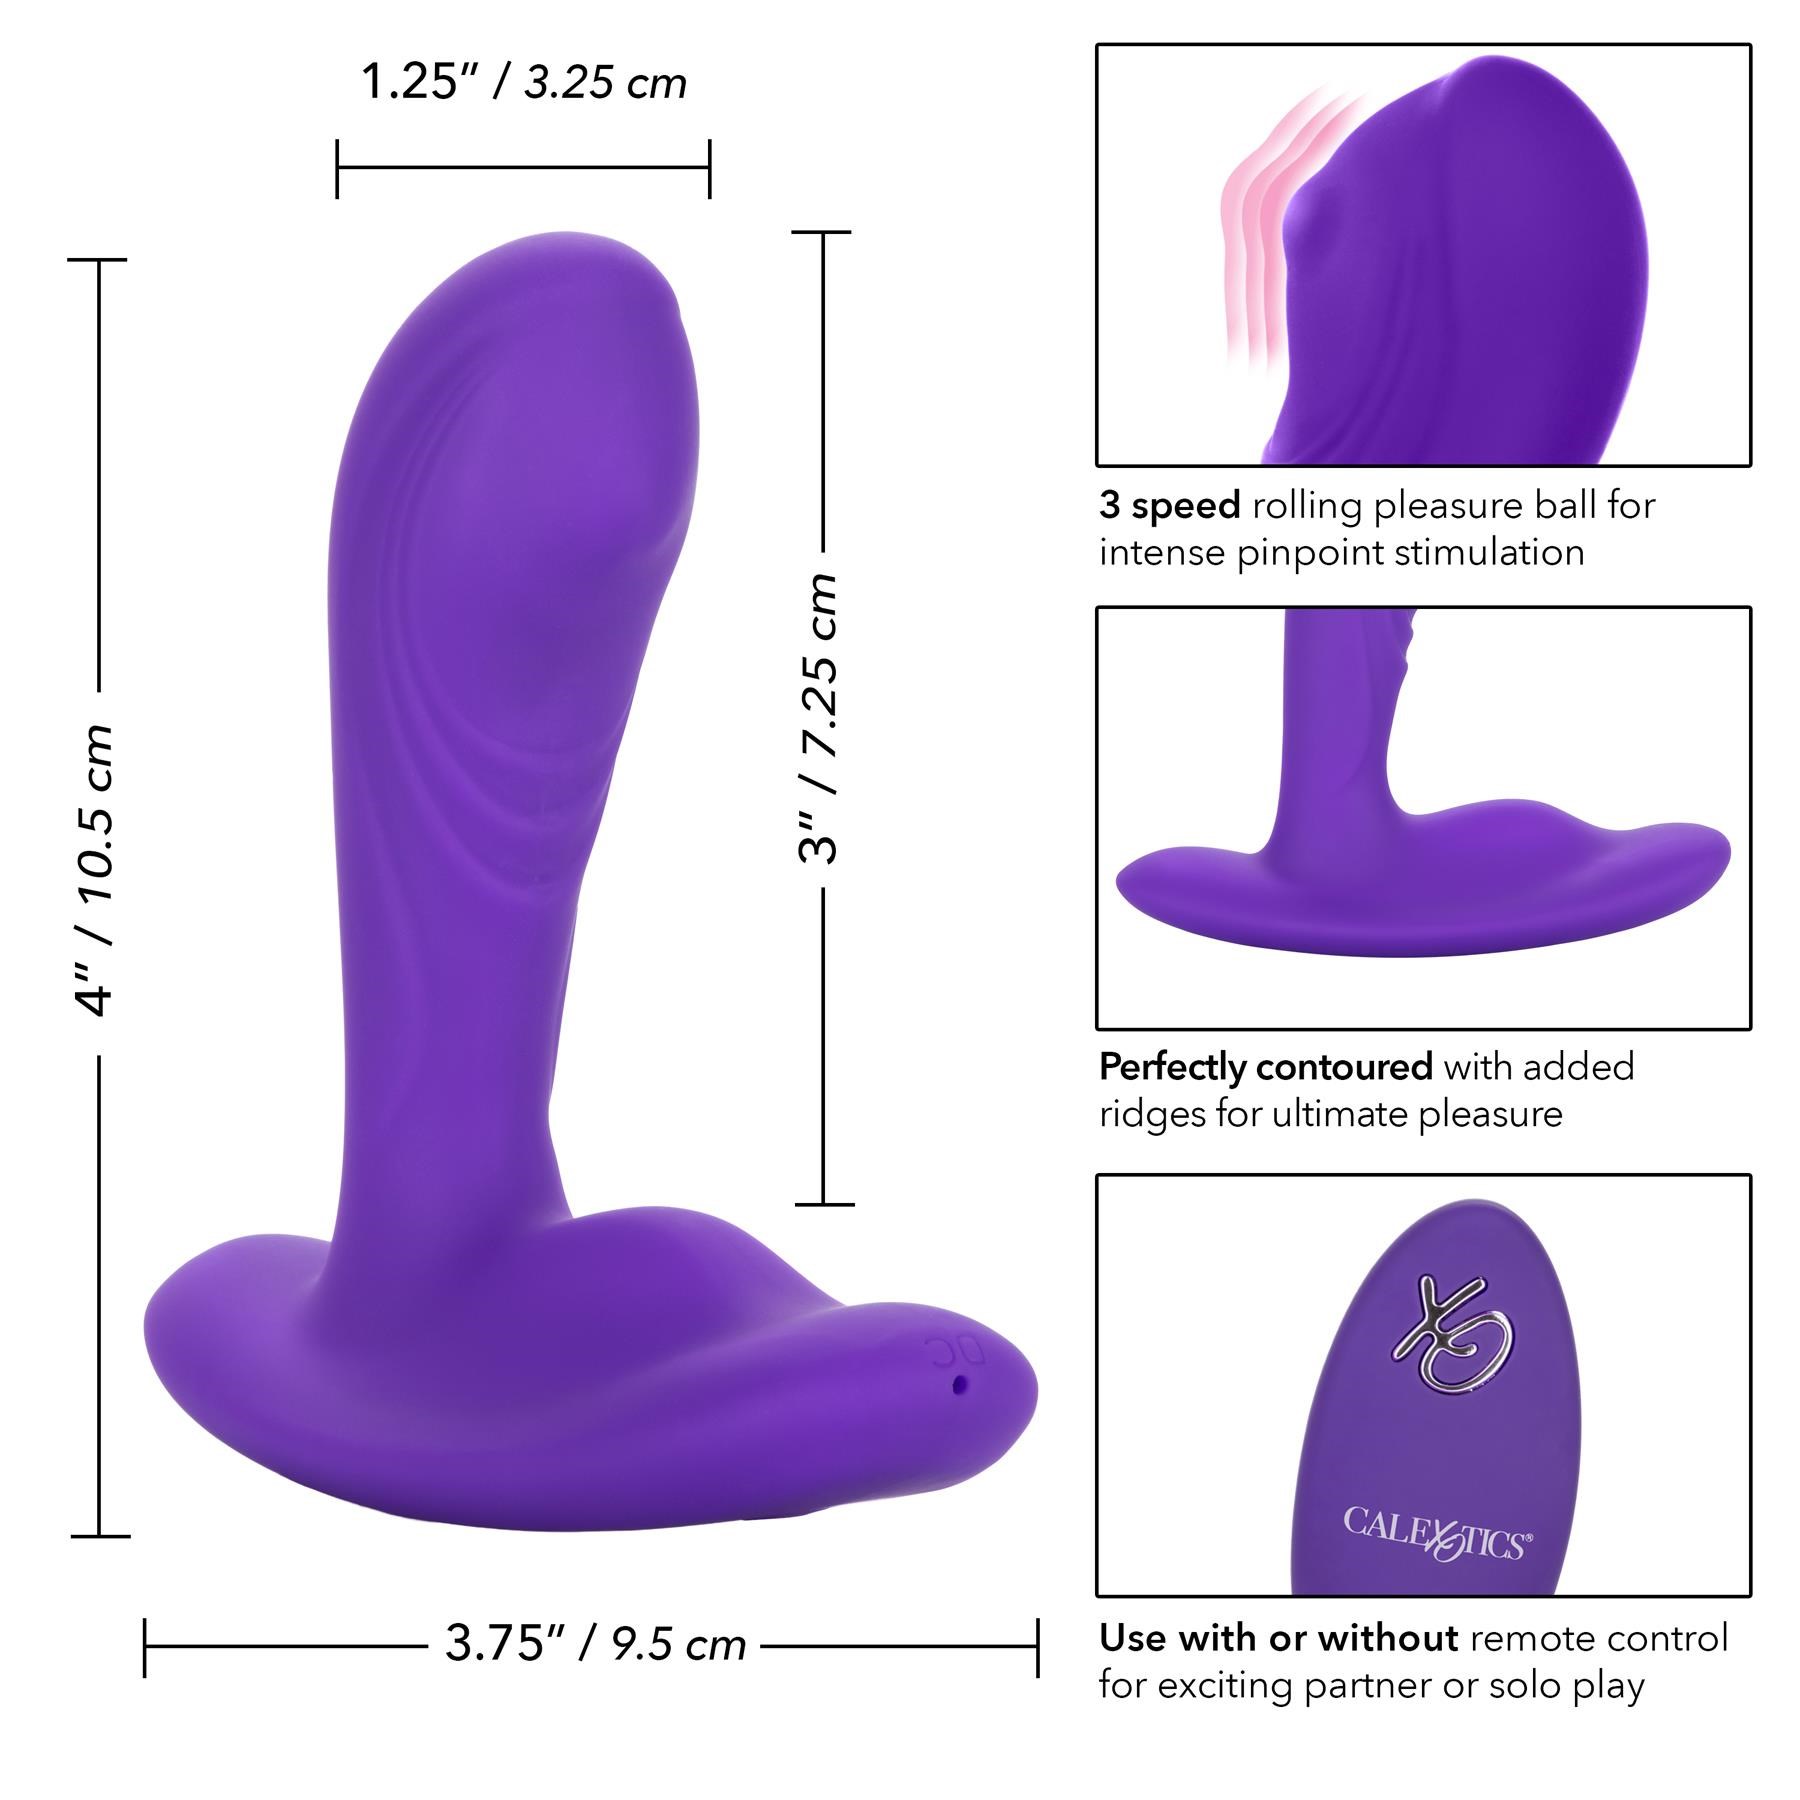 Silicone Remote Pinpoint Pleaser - Dimensions and Instructions